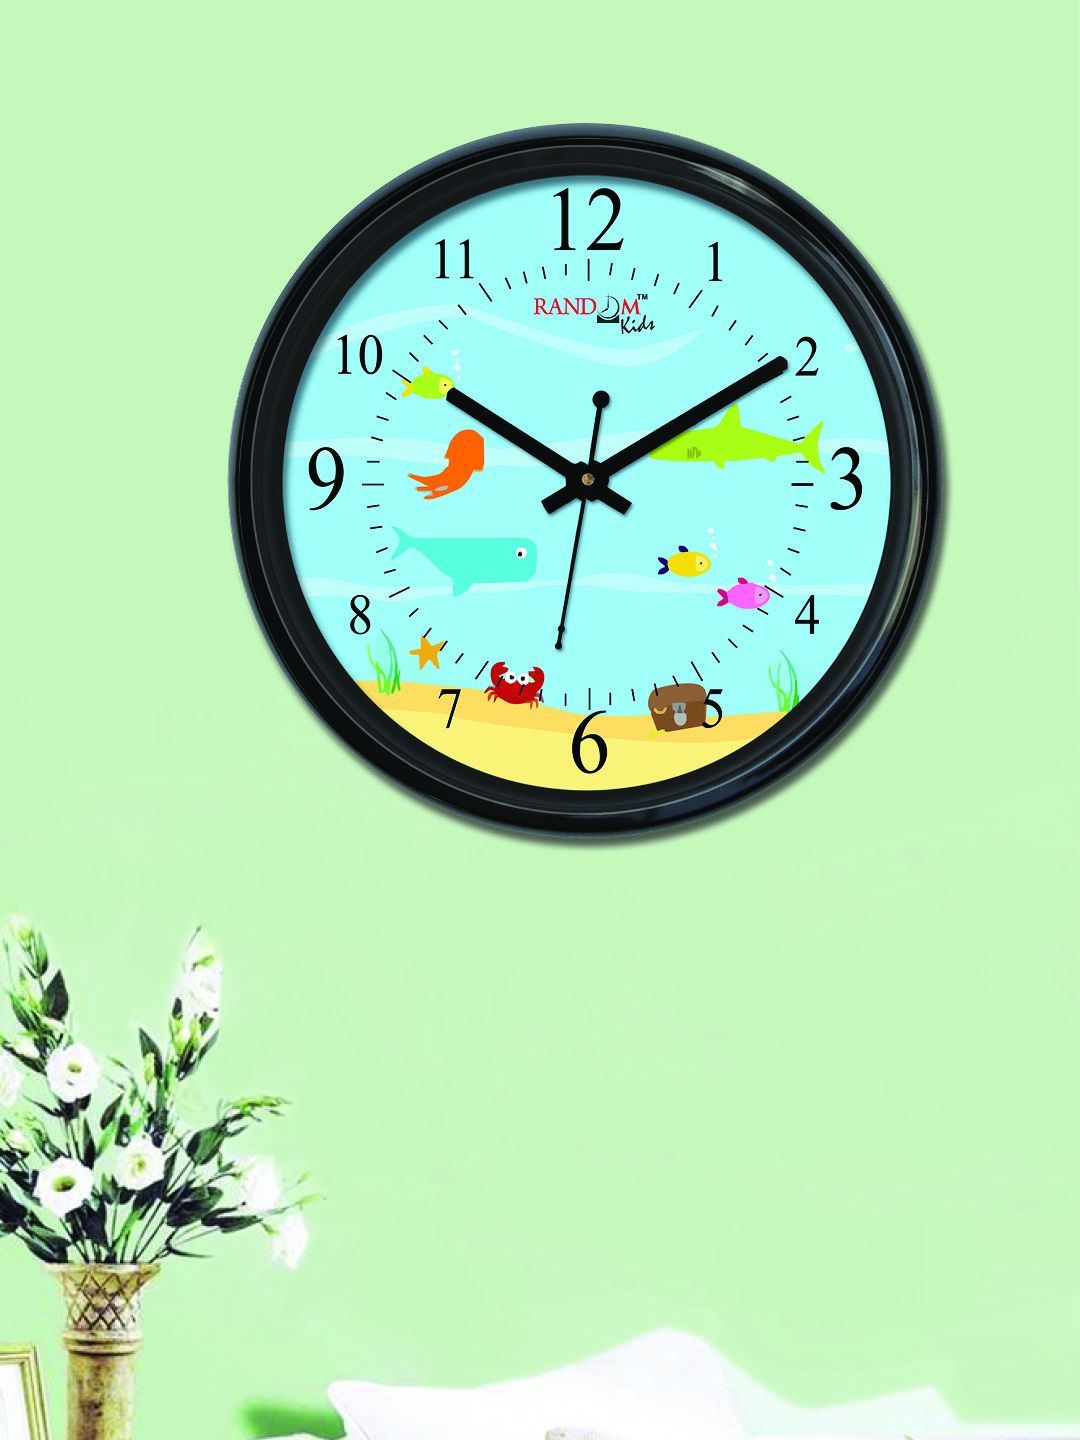 RANDOM Turquoise Blue Round Printed Analogue Wall Clock Price in India